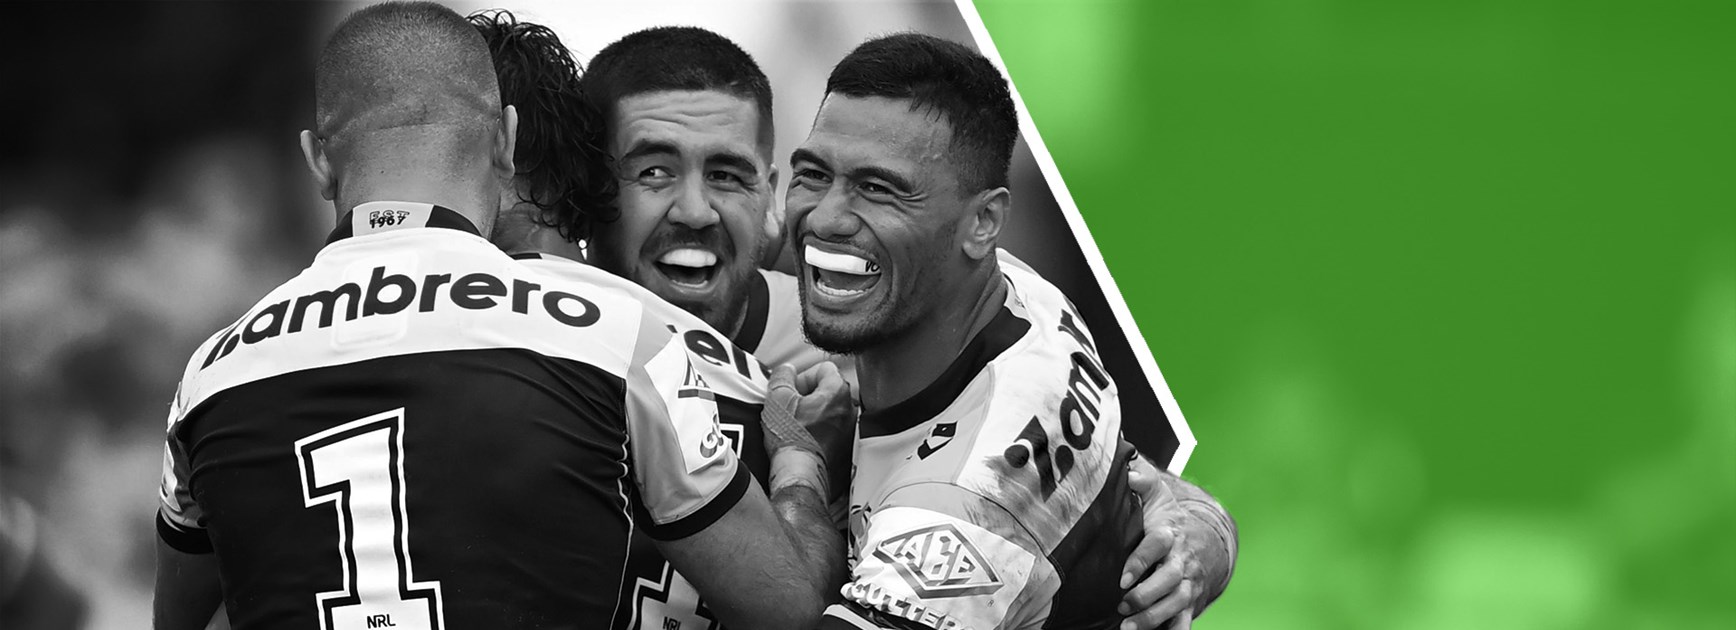 NRL Tipping: Expert tips for Round 5